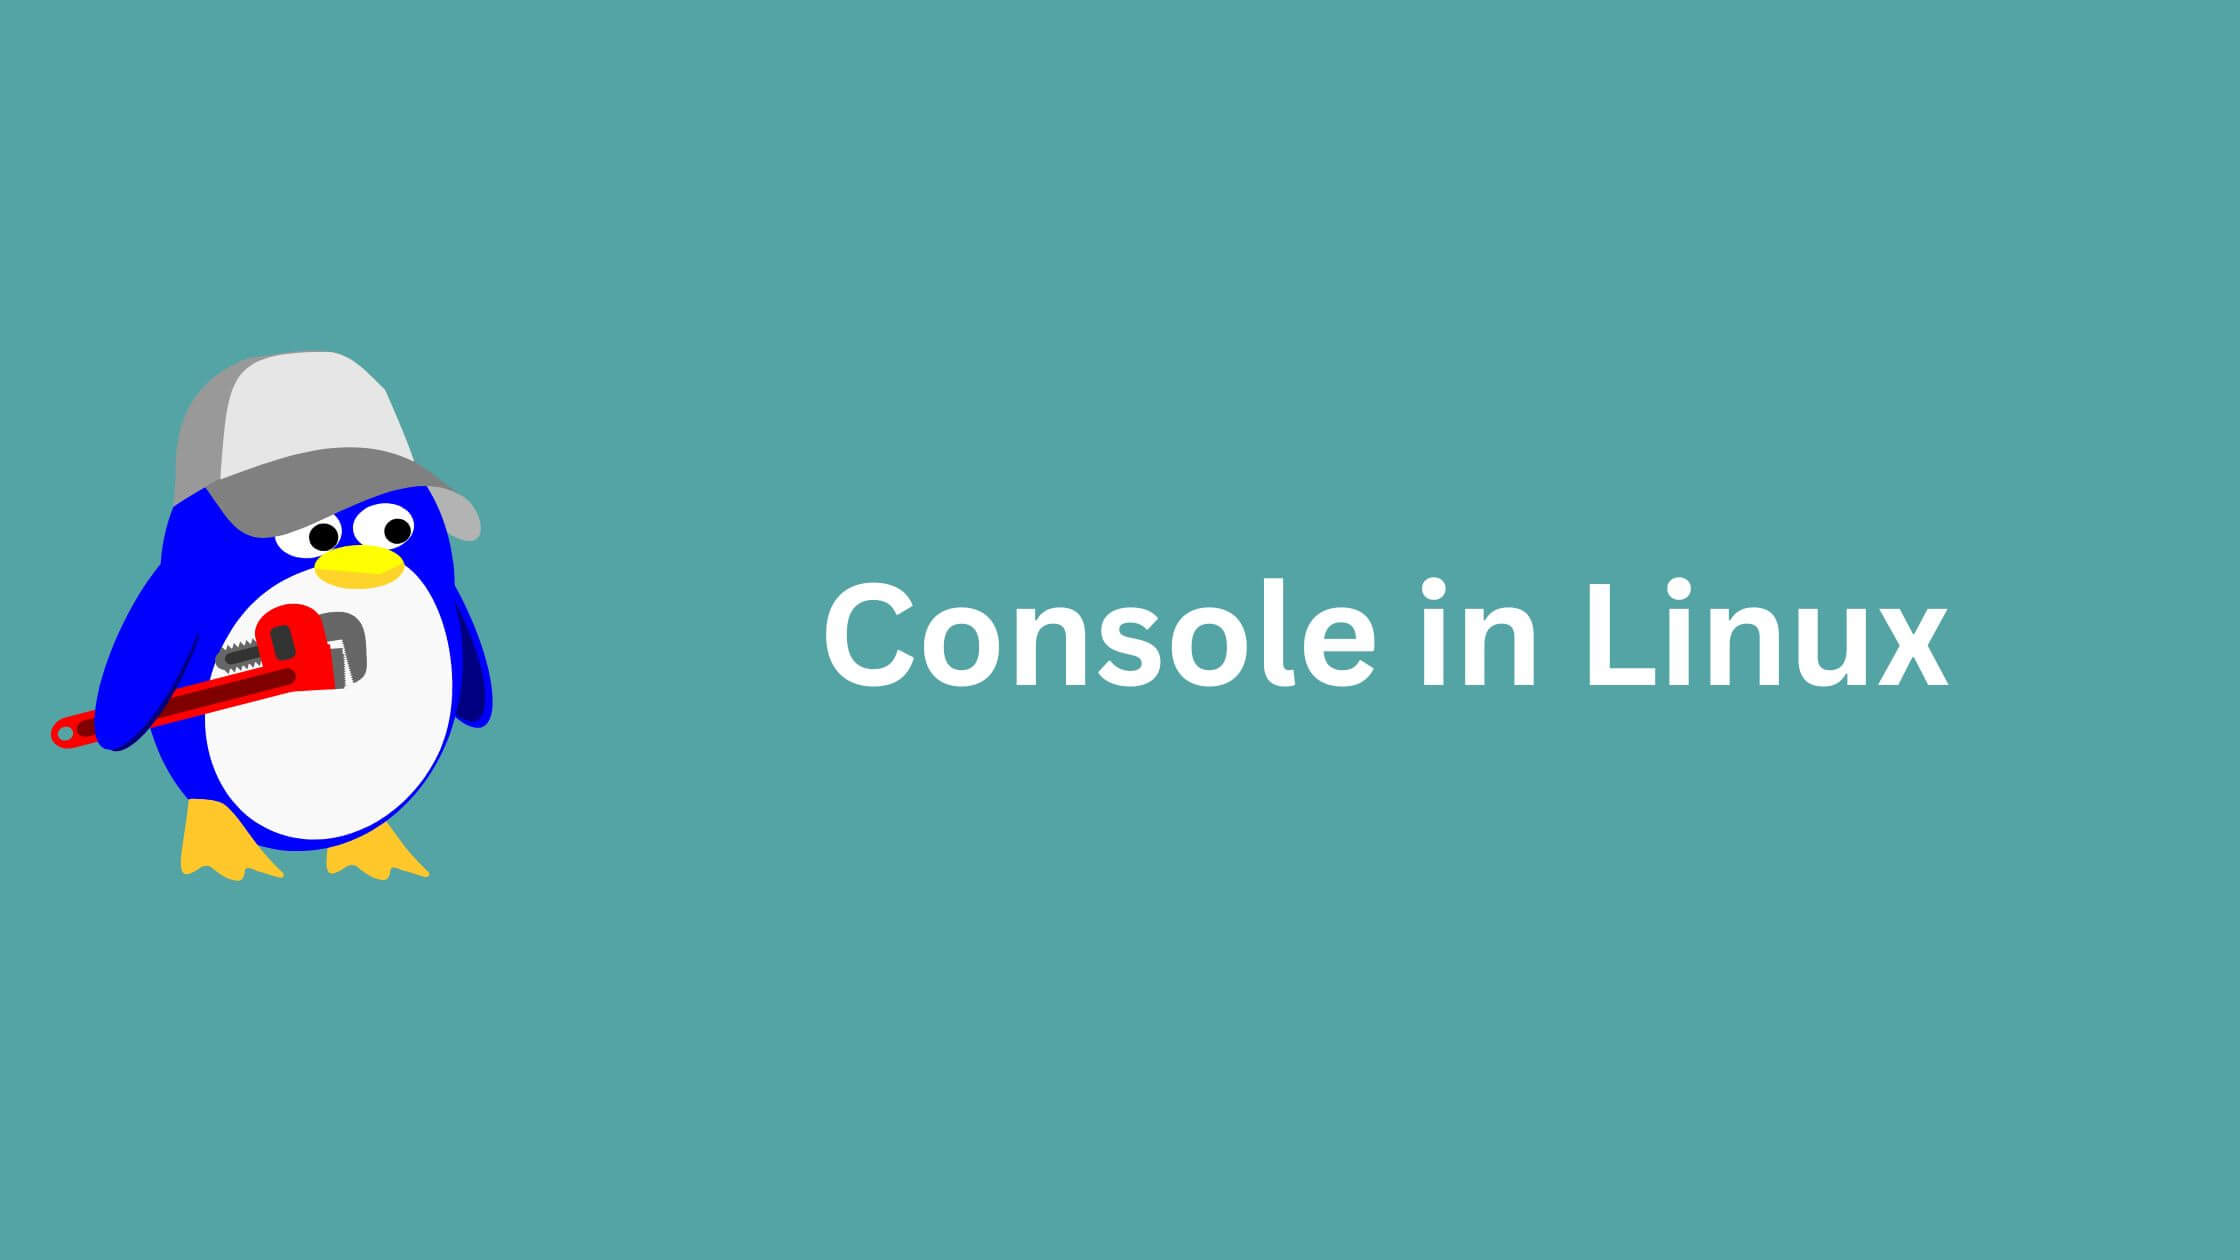 Console in Linux